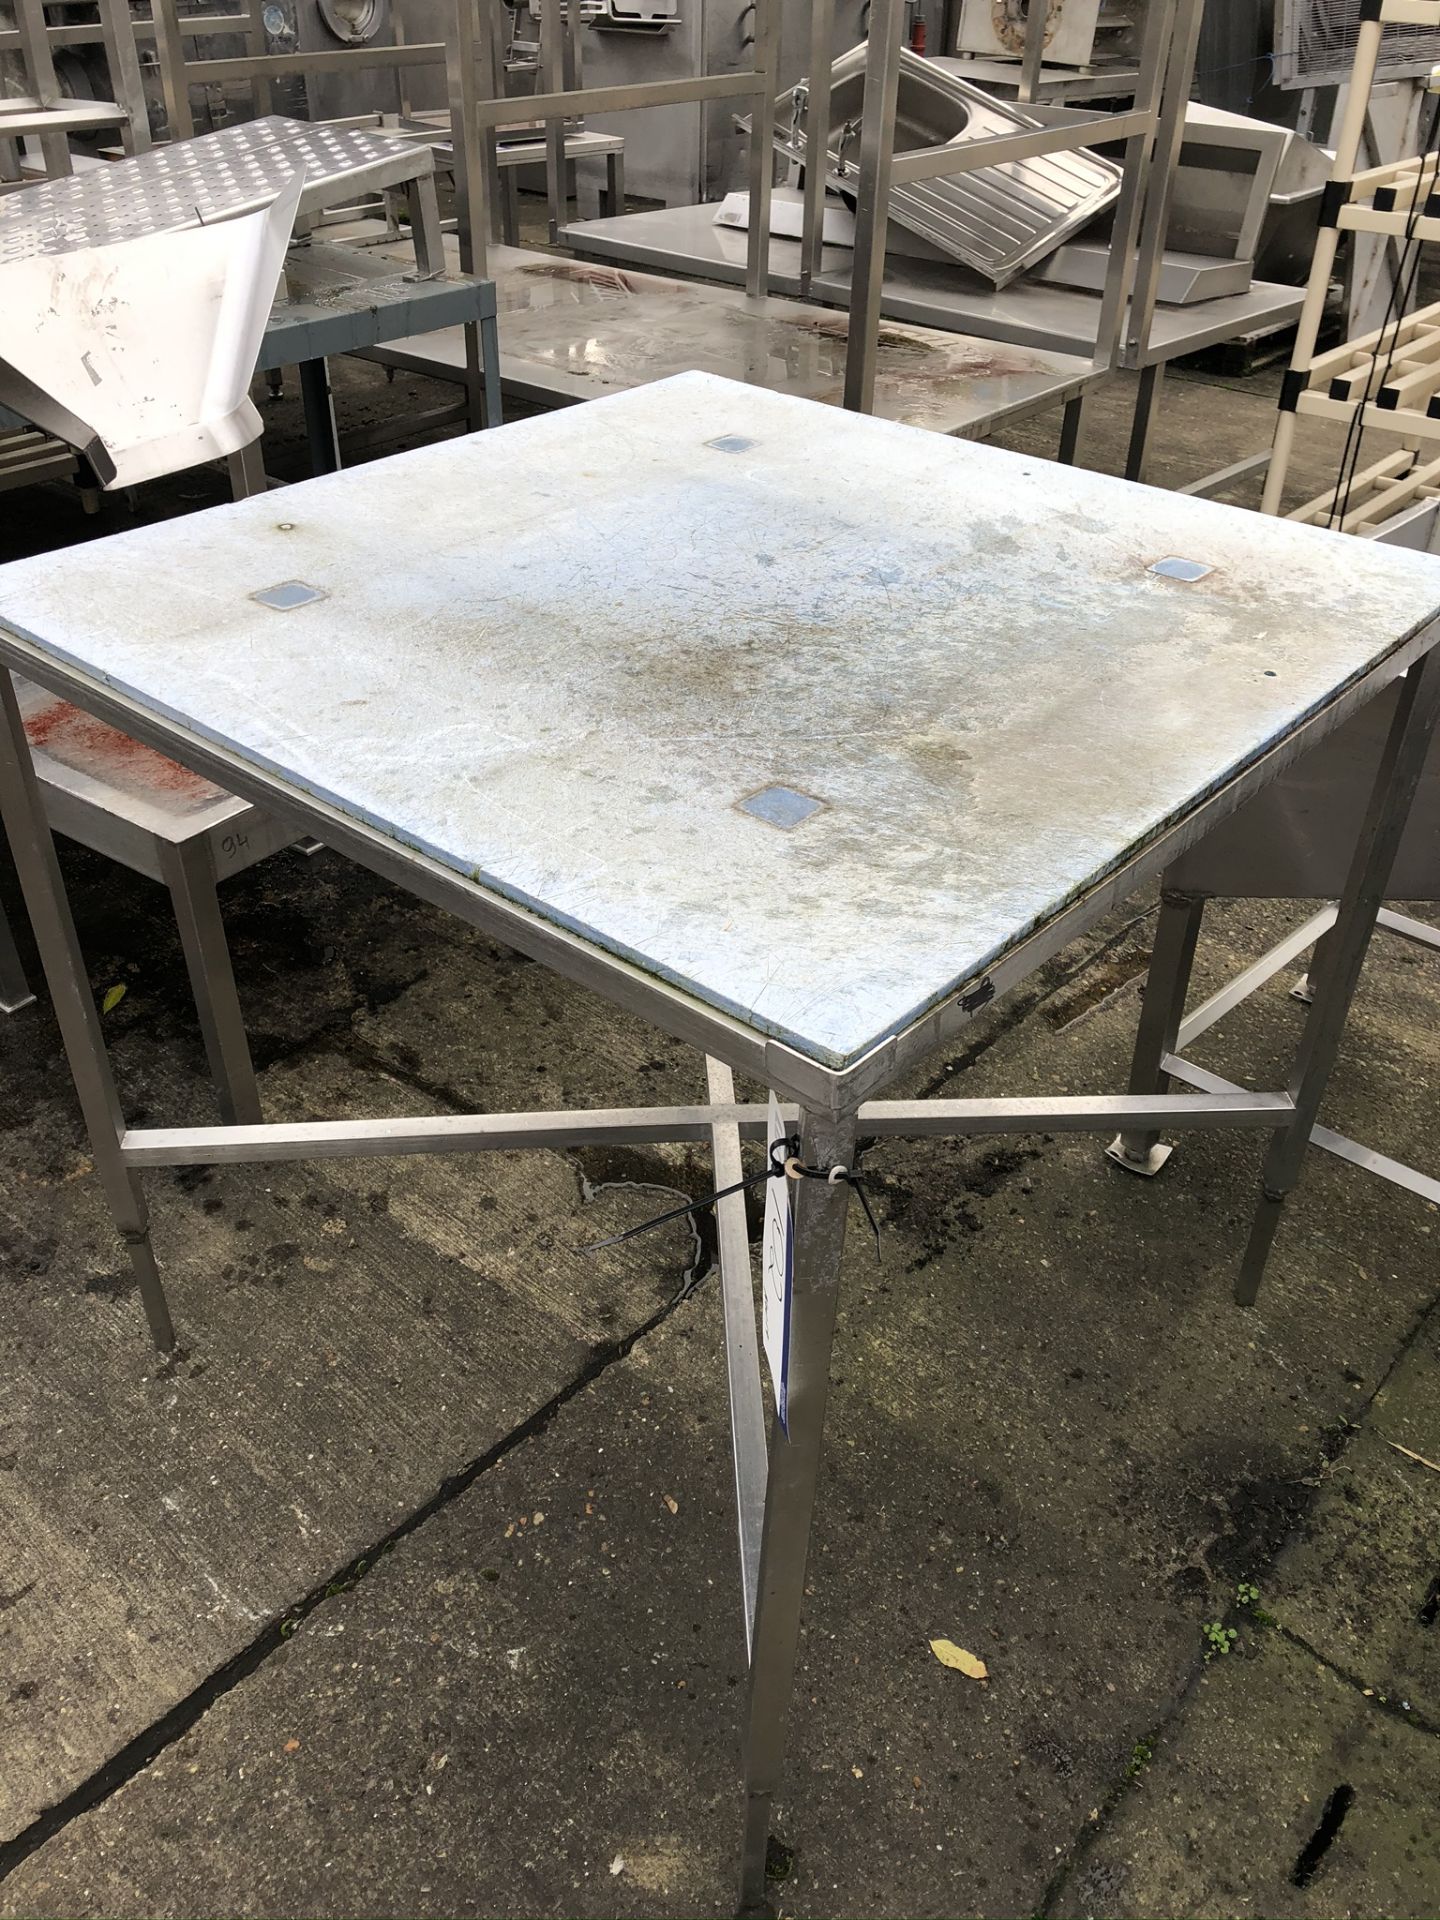 Plastic Topped Table, on stainless steel frame, di - Image 2 of 2